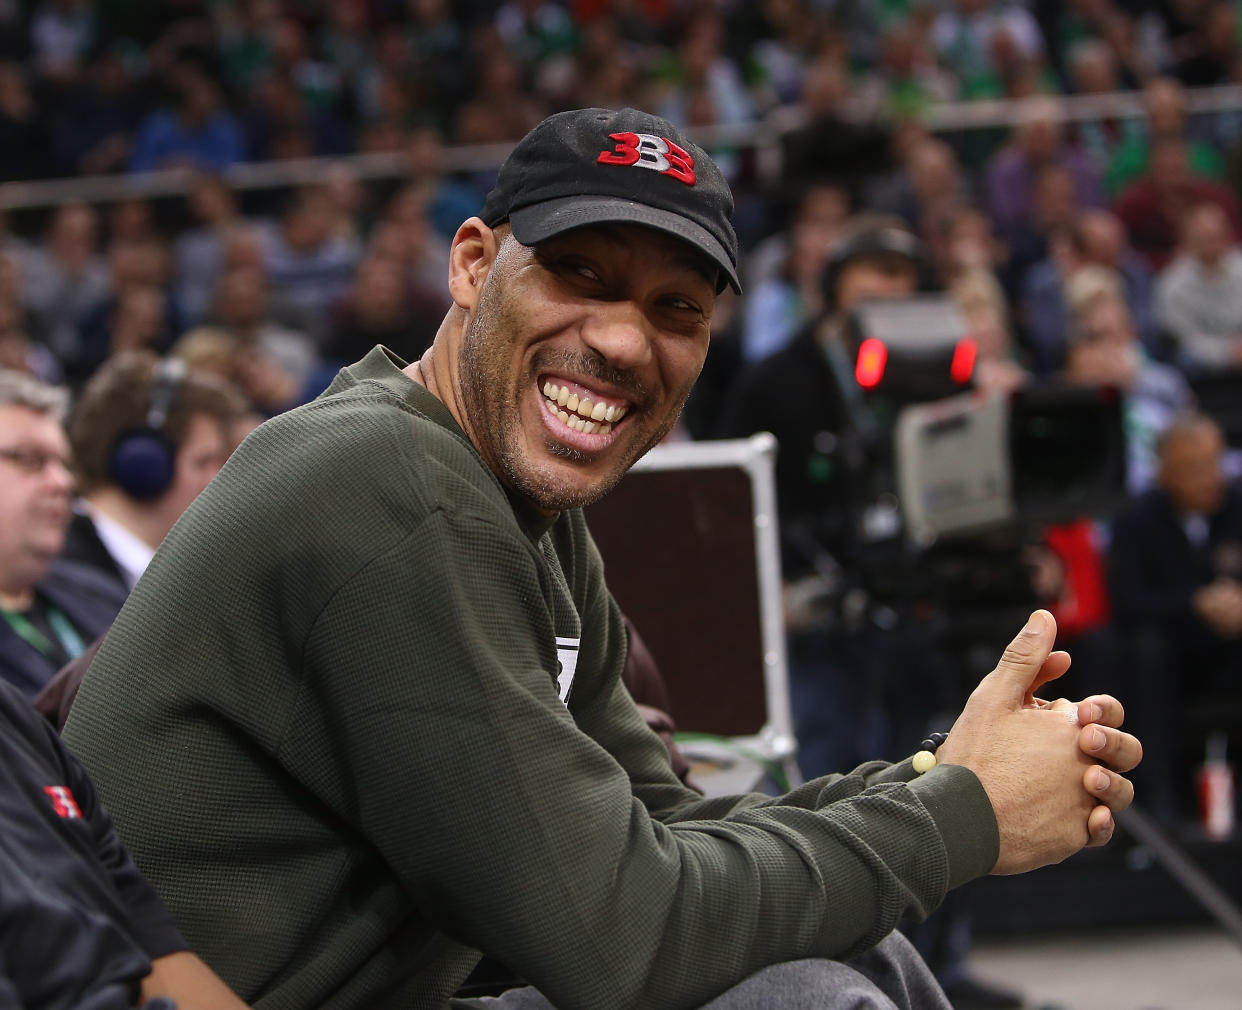 LaVar Ball’s method of recruiting prospects to his new start-up league leaves a lot to be desired. (Getty)